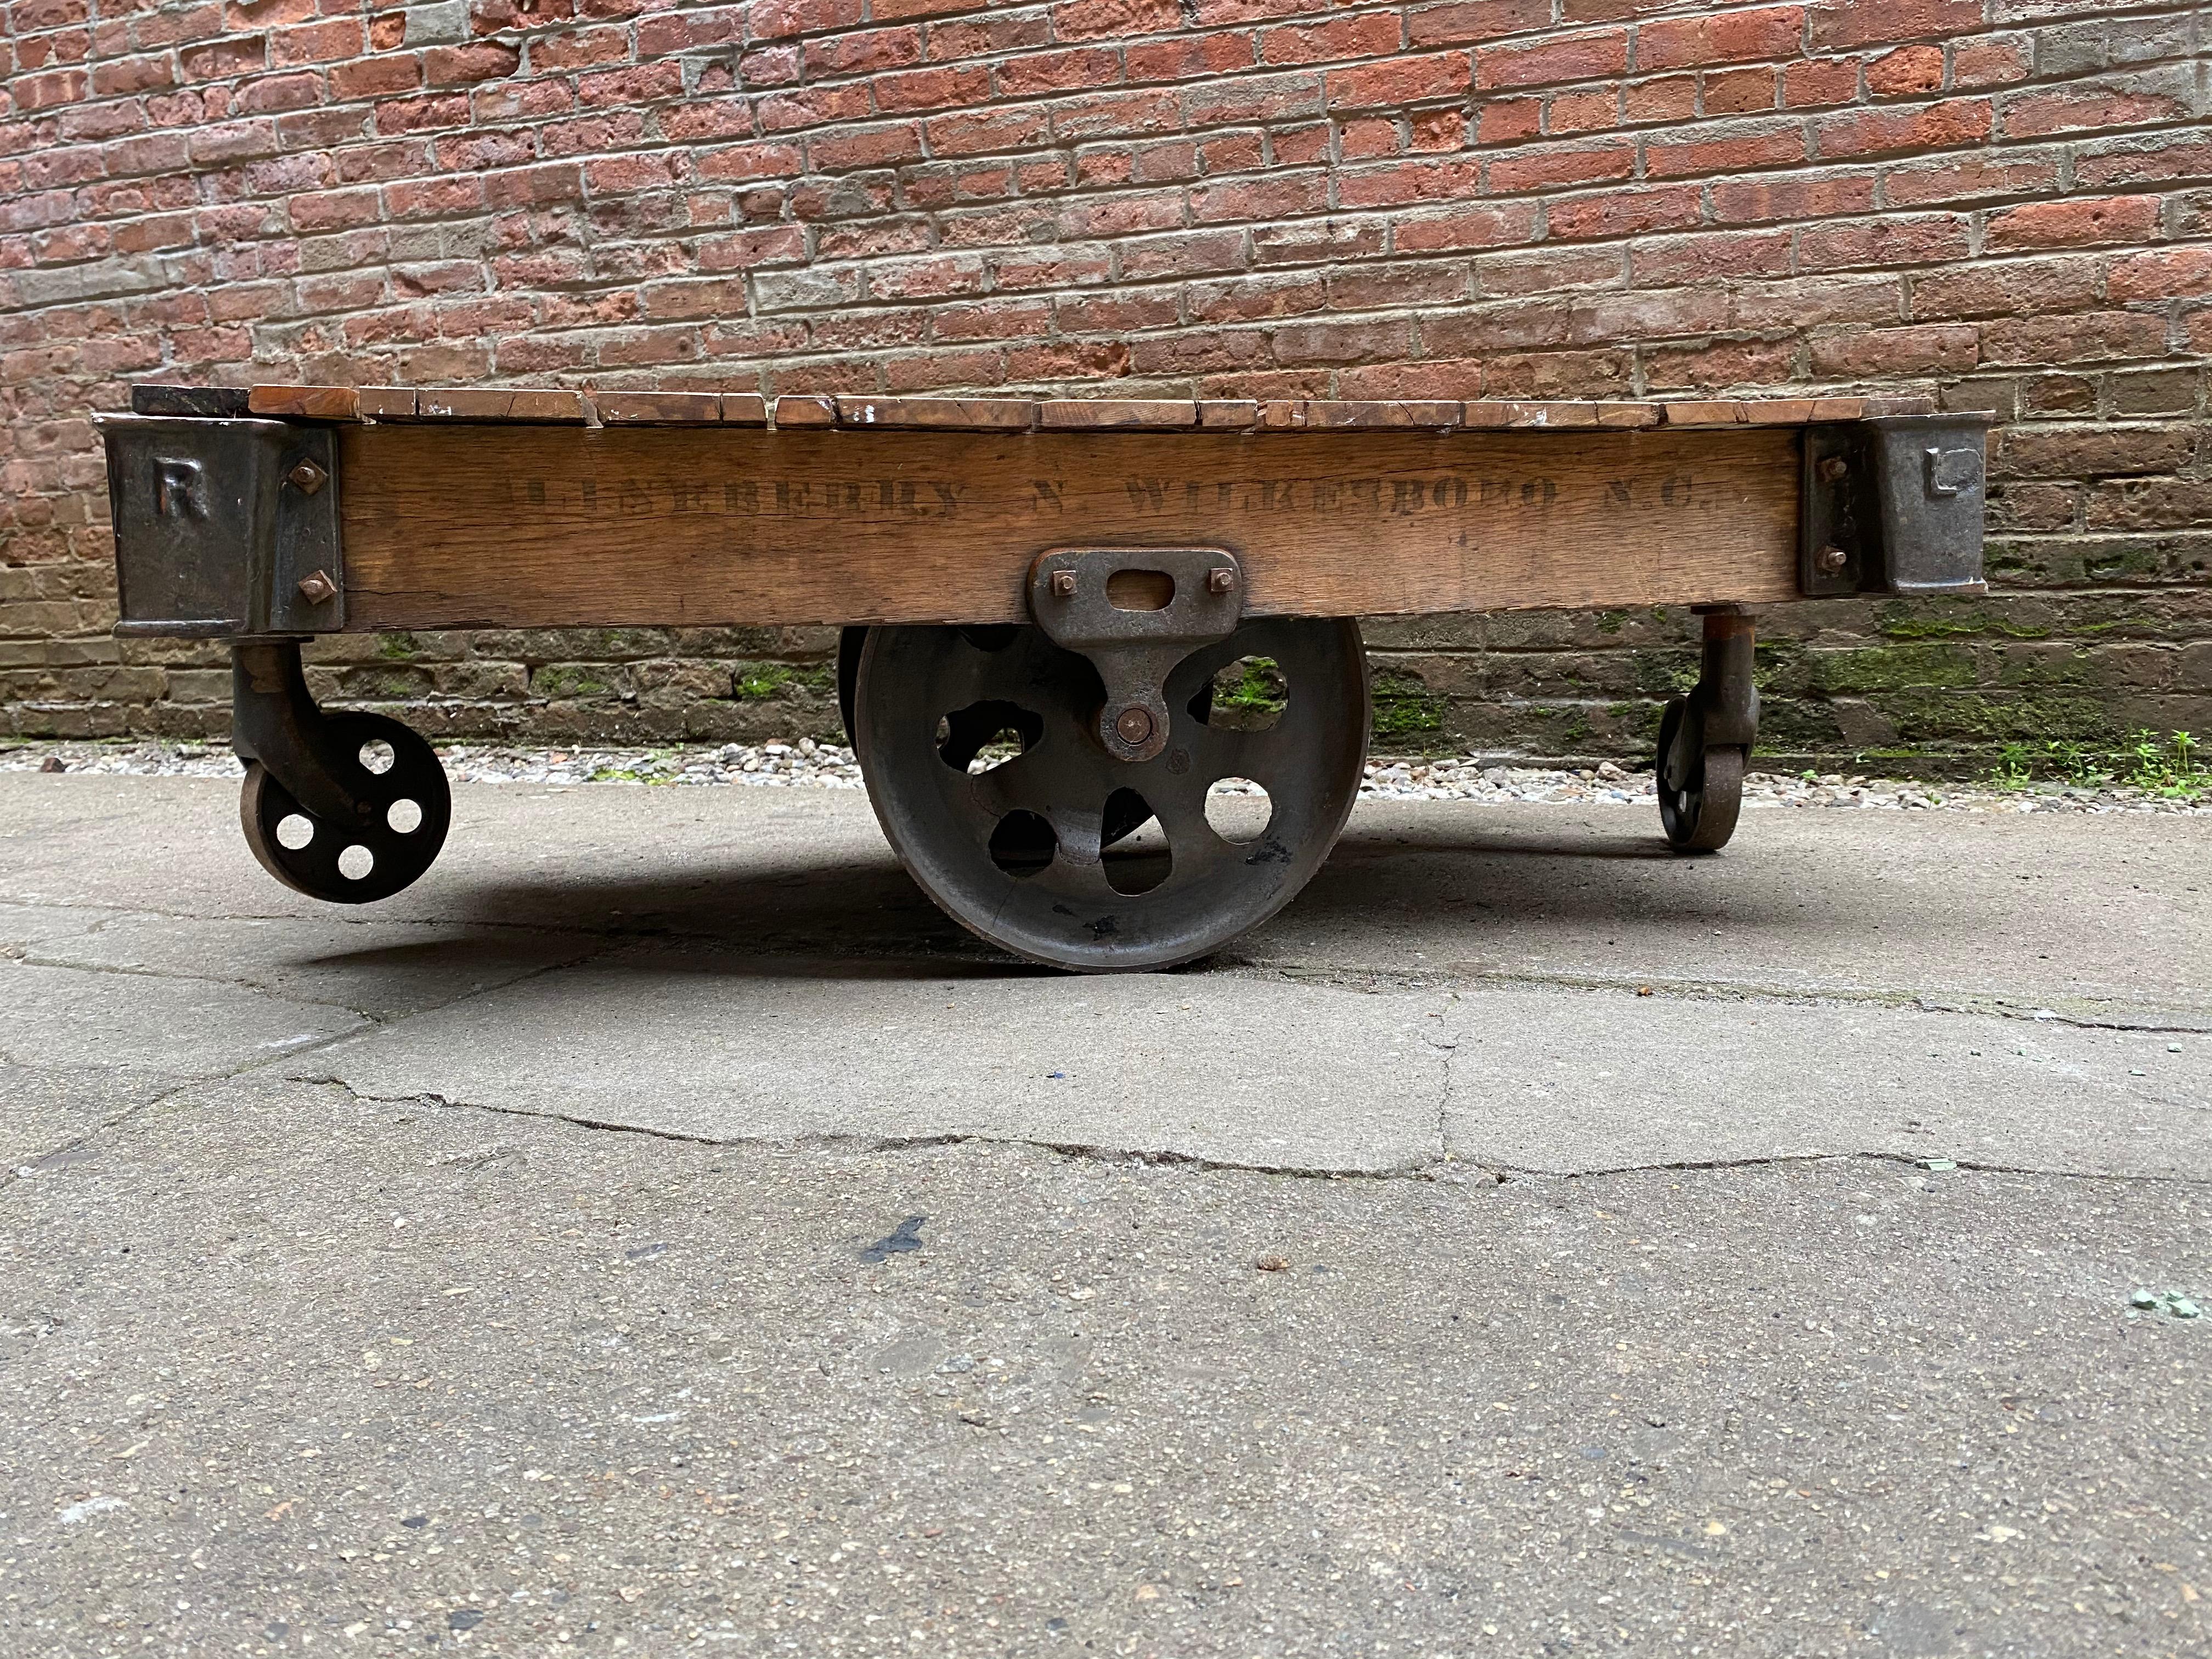 Early industrial iron with wood slat rolling cart. Heavy duty cast iron wheels. Stencil graphics on the side of the cart, N. Wilkesboro, NC. It looks as if the wood platform has been refinish or cleaned up. Rolls nicely. 

Structurally sound and